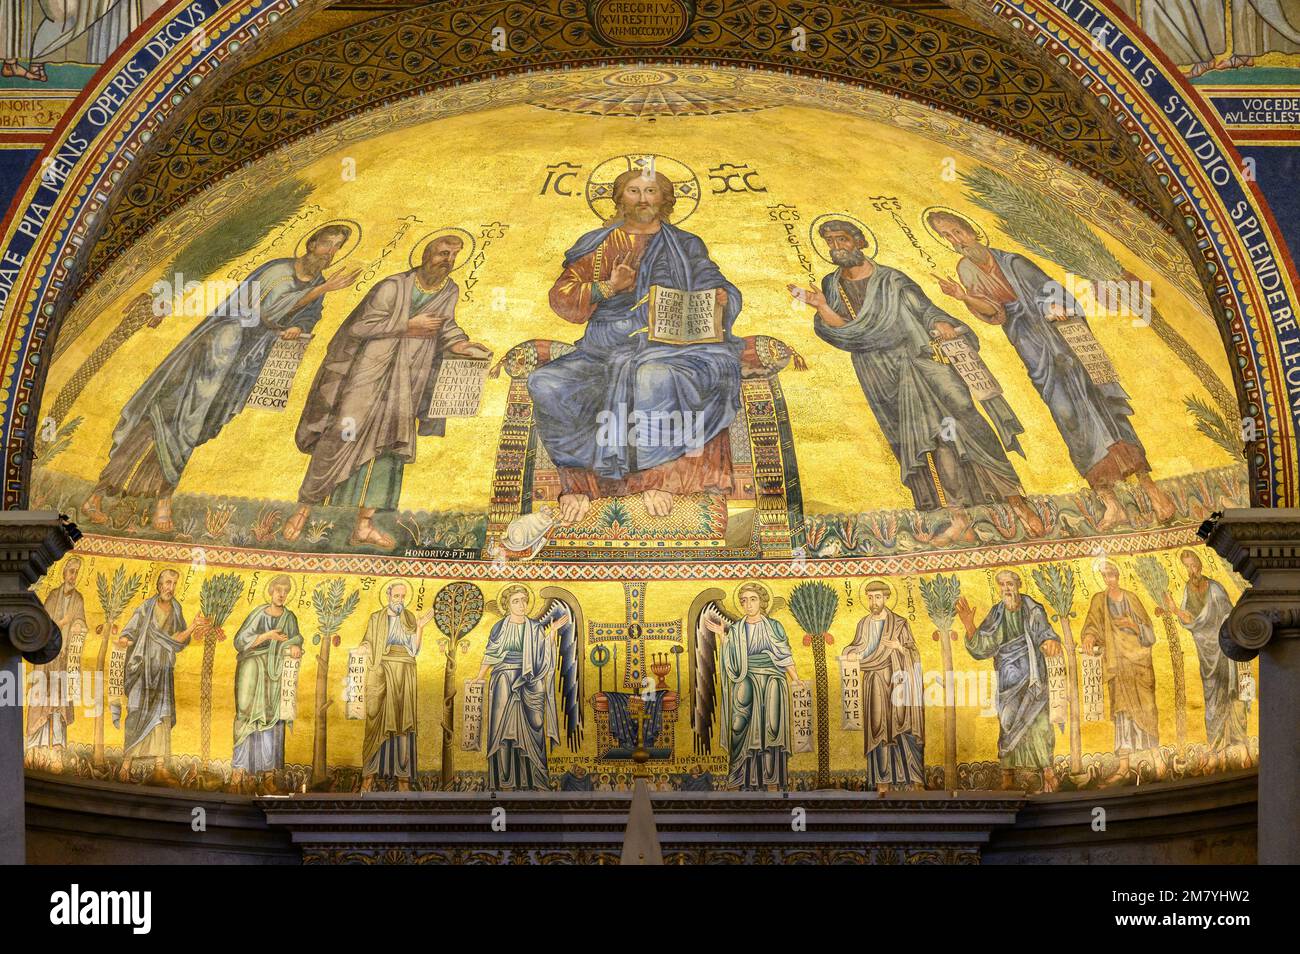 Rome. Italy. Basilica of Saint Paul Outside the Walls (Basilica Papale di San Paolo fuori le Mura). Apse mosaic, Christ is flanked by the Apostles Pet Stock Photo